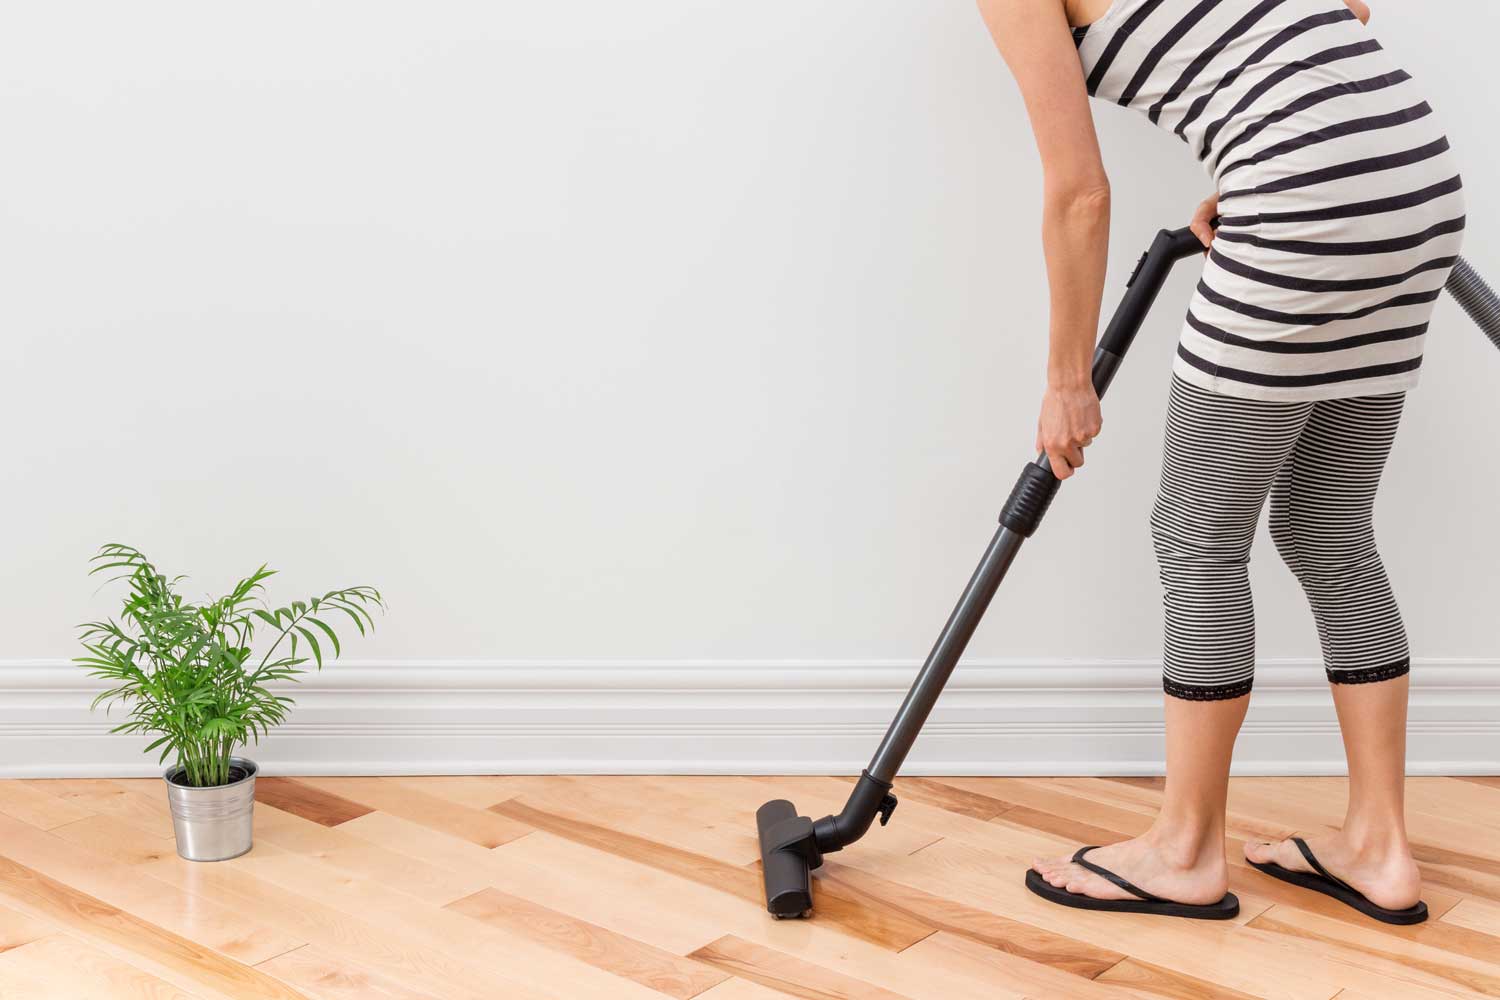 Regulary vacuum or sweep floors to remove dirt and keep your home floors looking amazing - tips from Footprints Floors in Fort Collins.